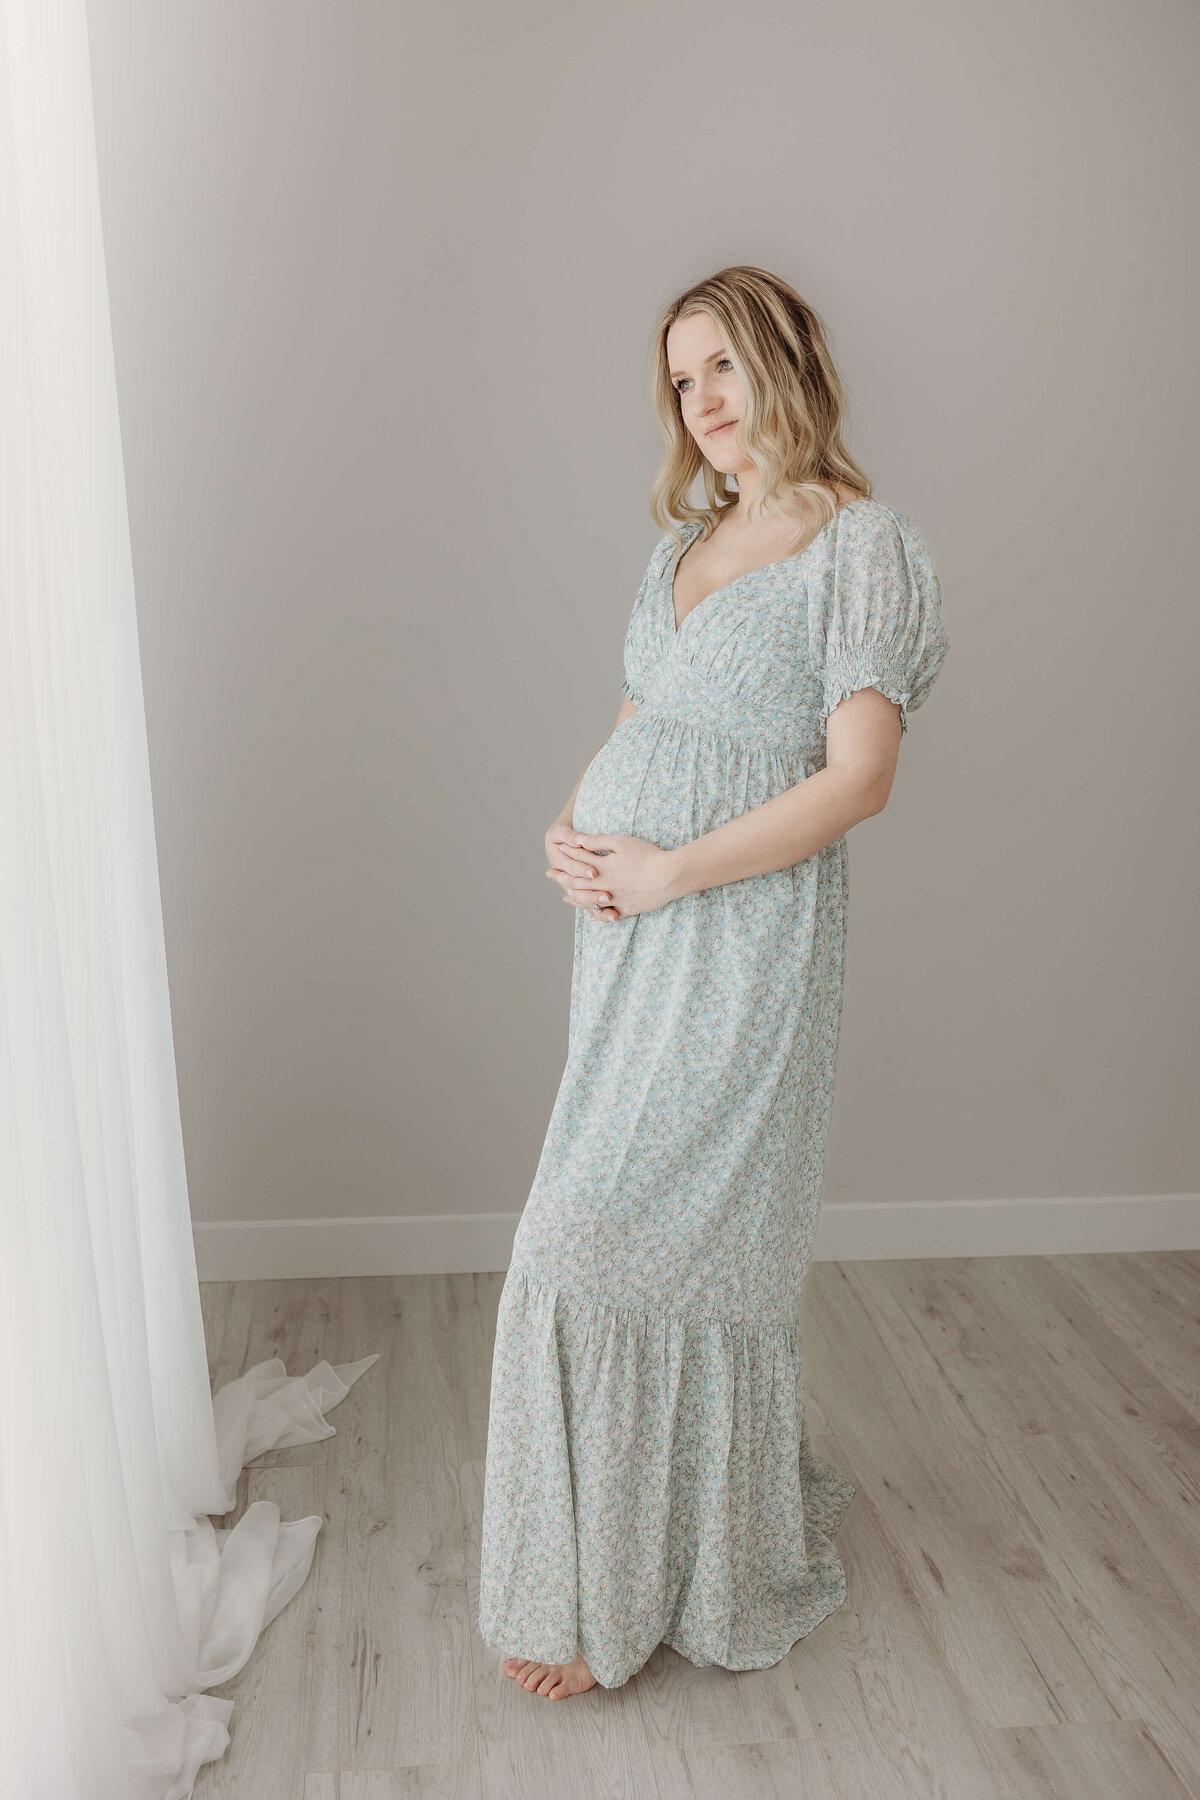 Full length portrait by window of expecting mom in dress for maternity pictures